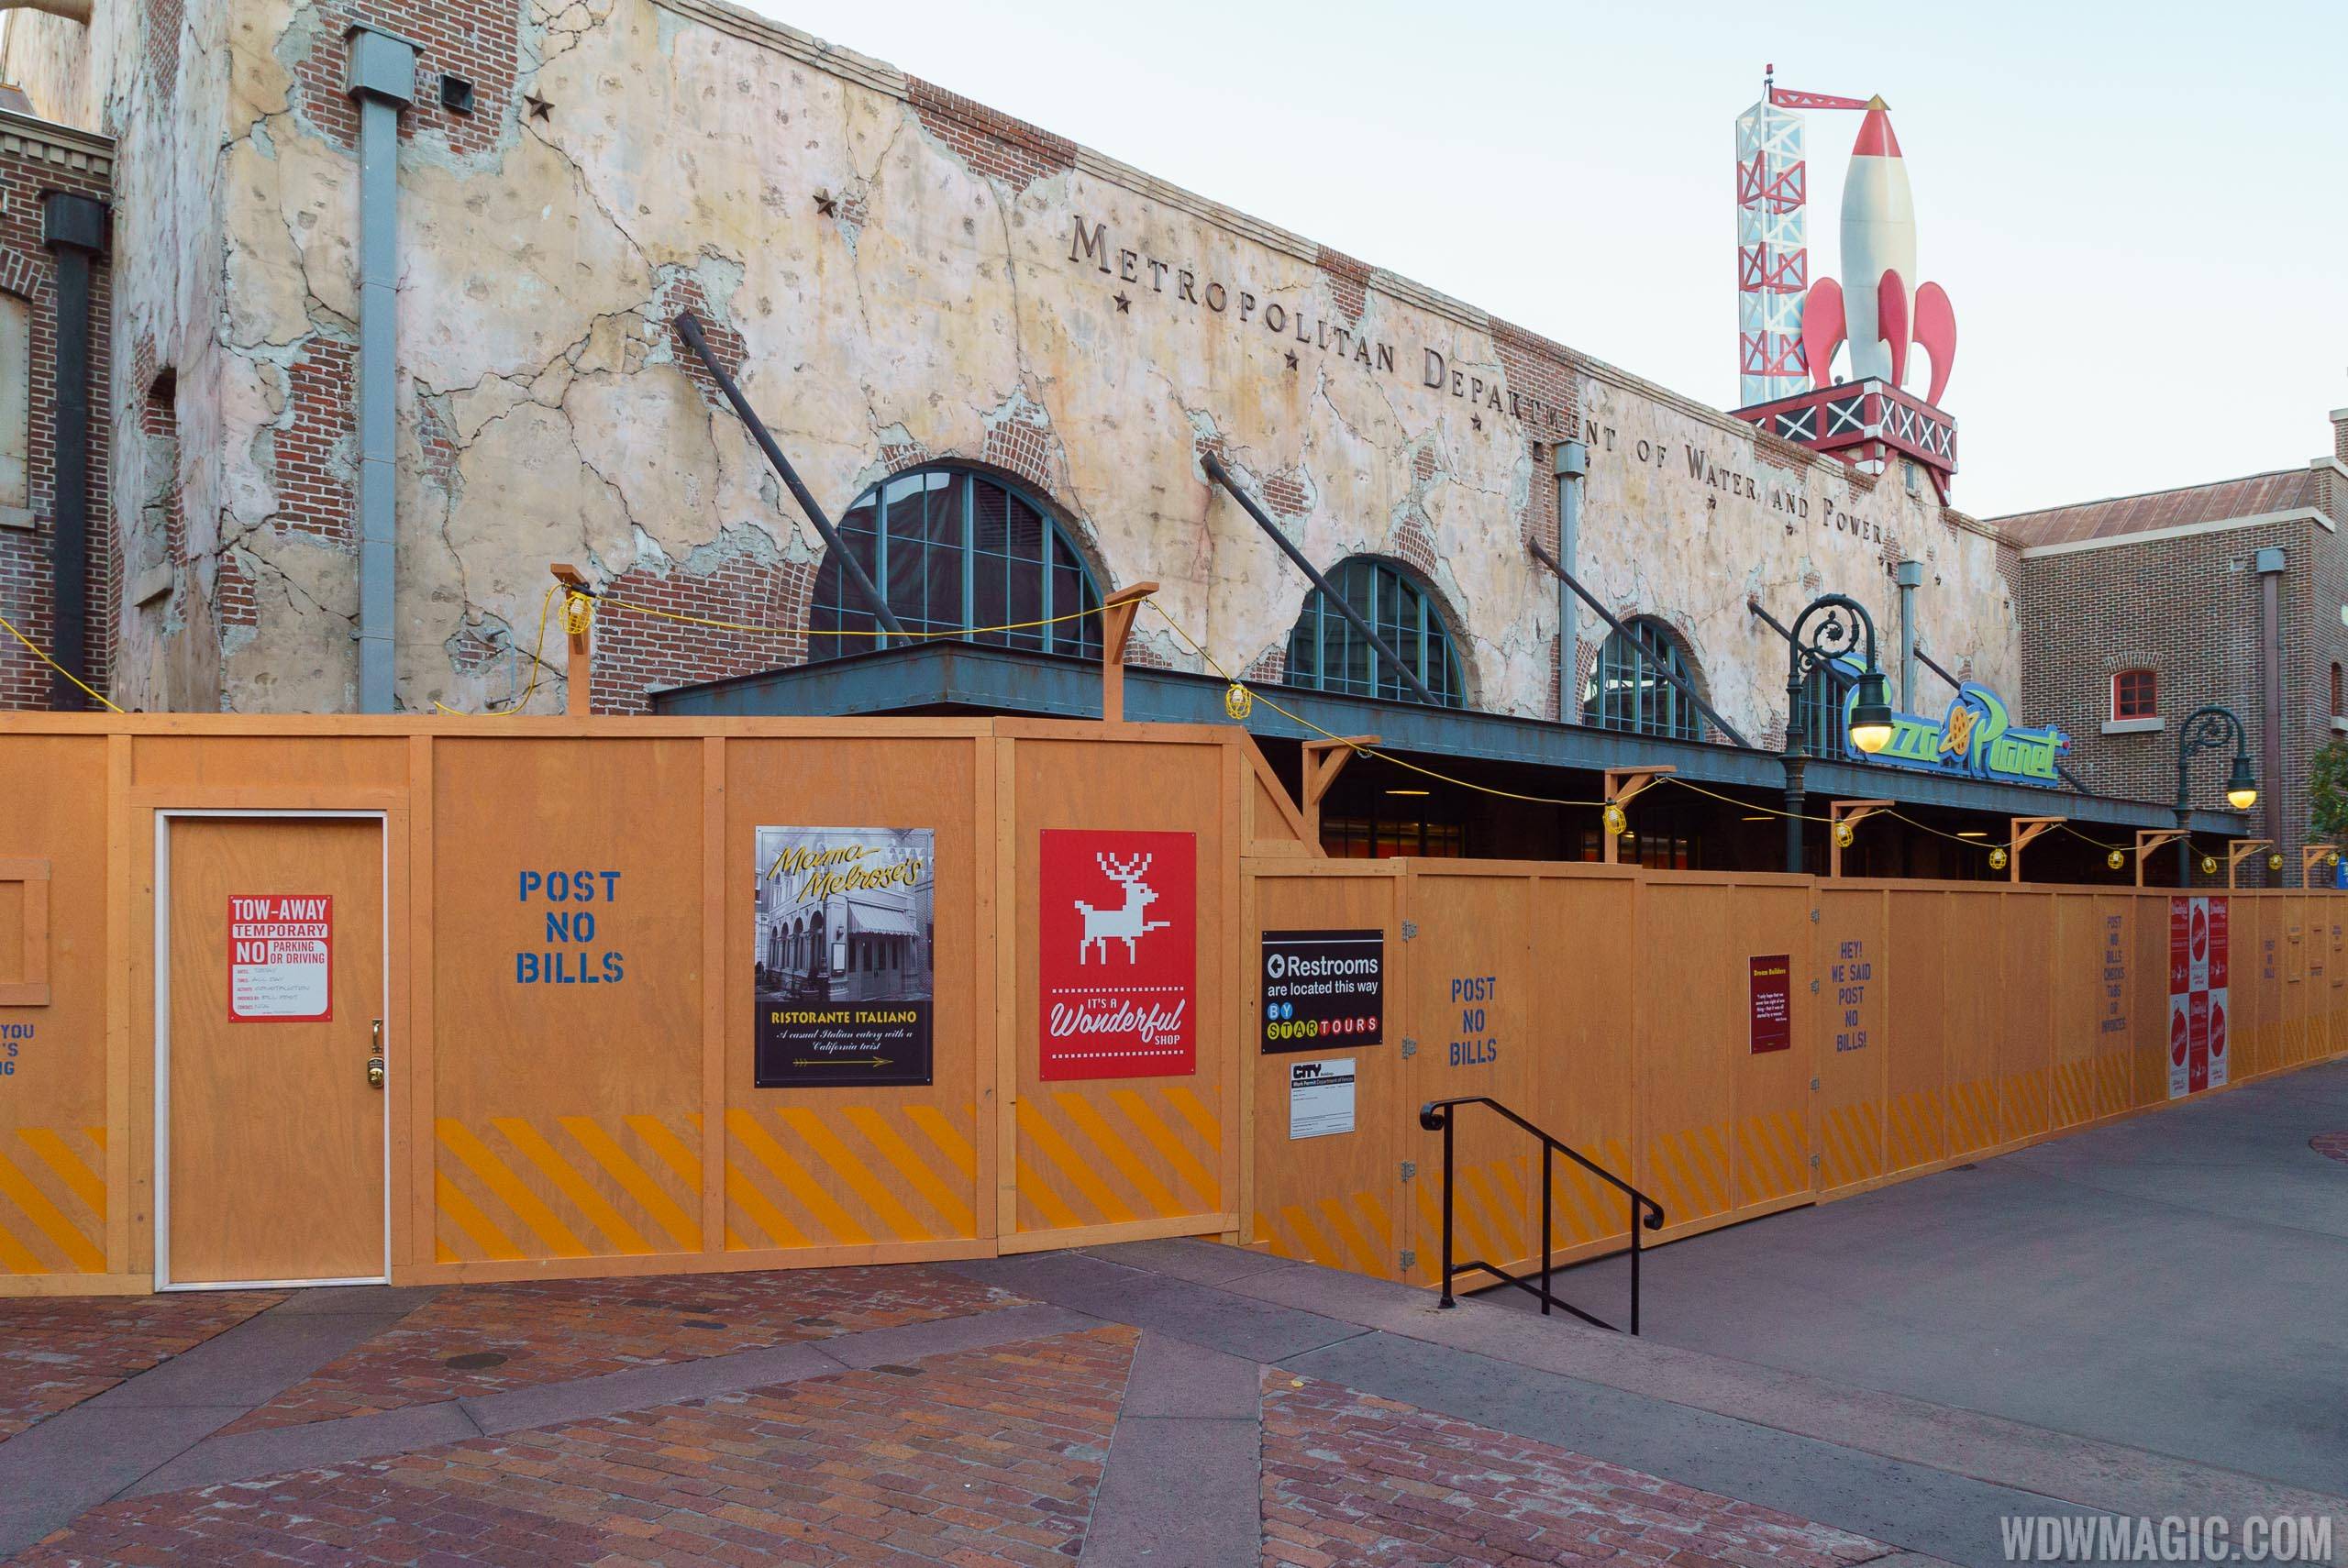 PHOTOS - Pizza Planet walled off as major refurbishment gets underway